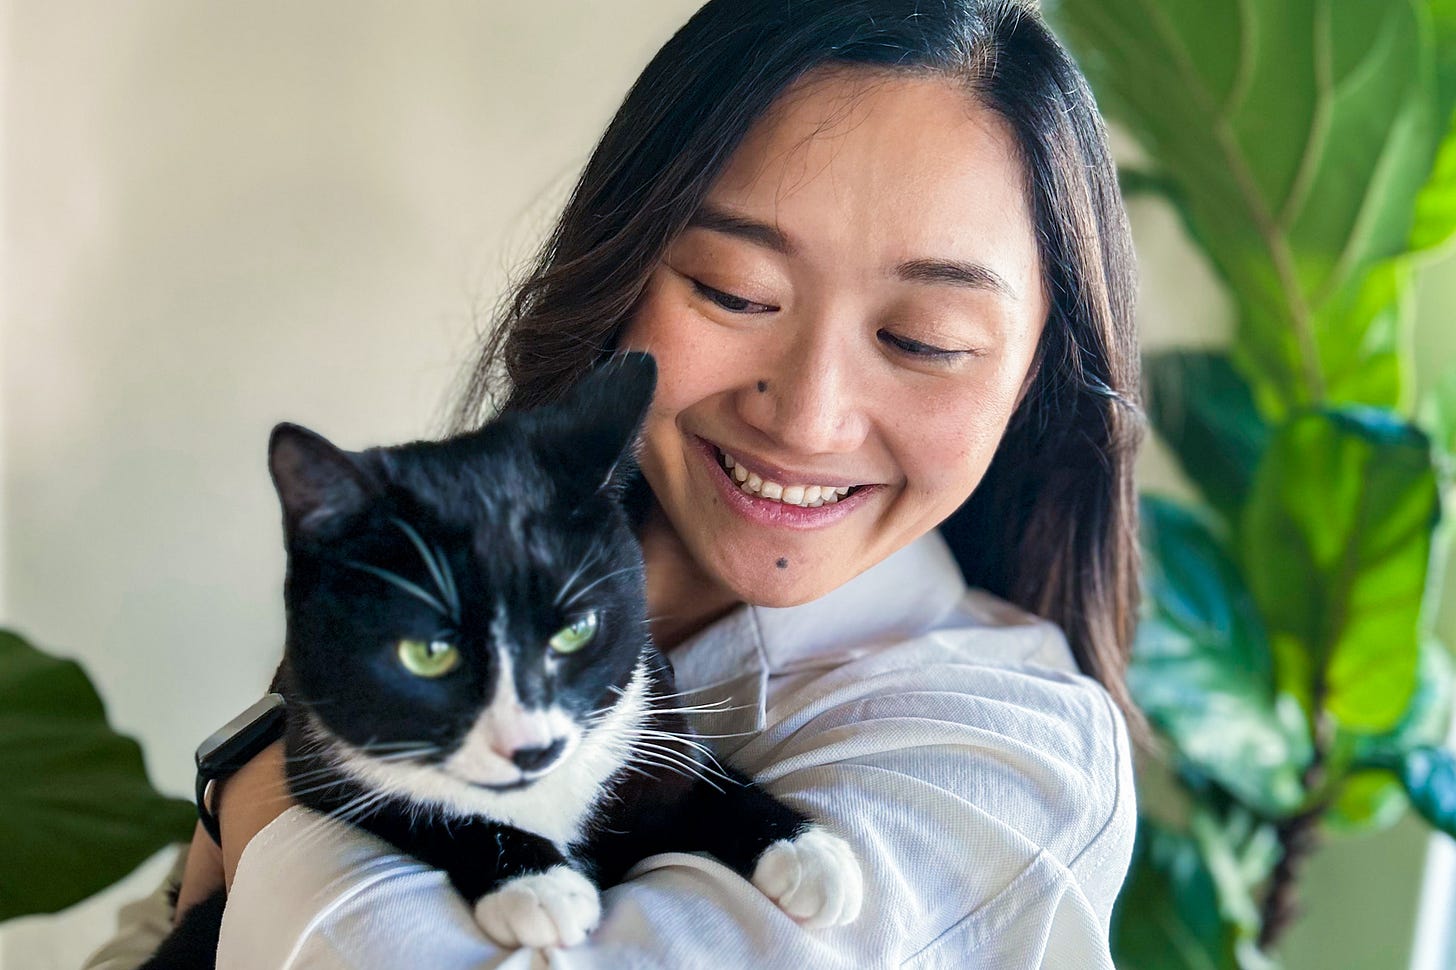 Woman with long brown hair holding a cat smiling